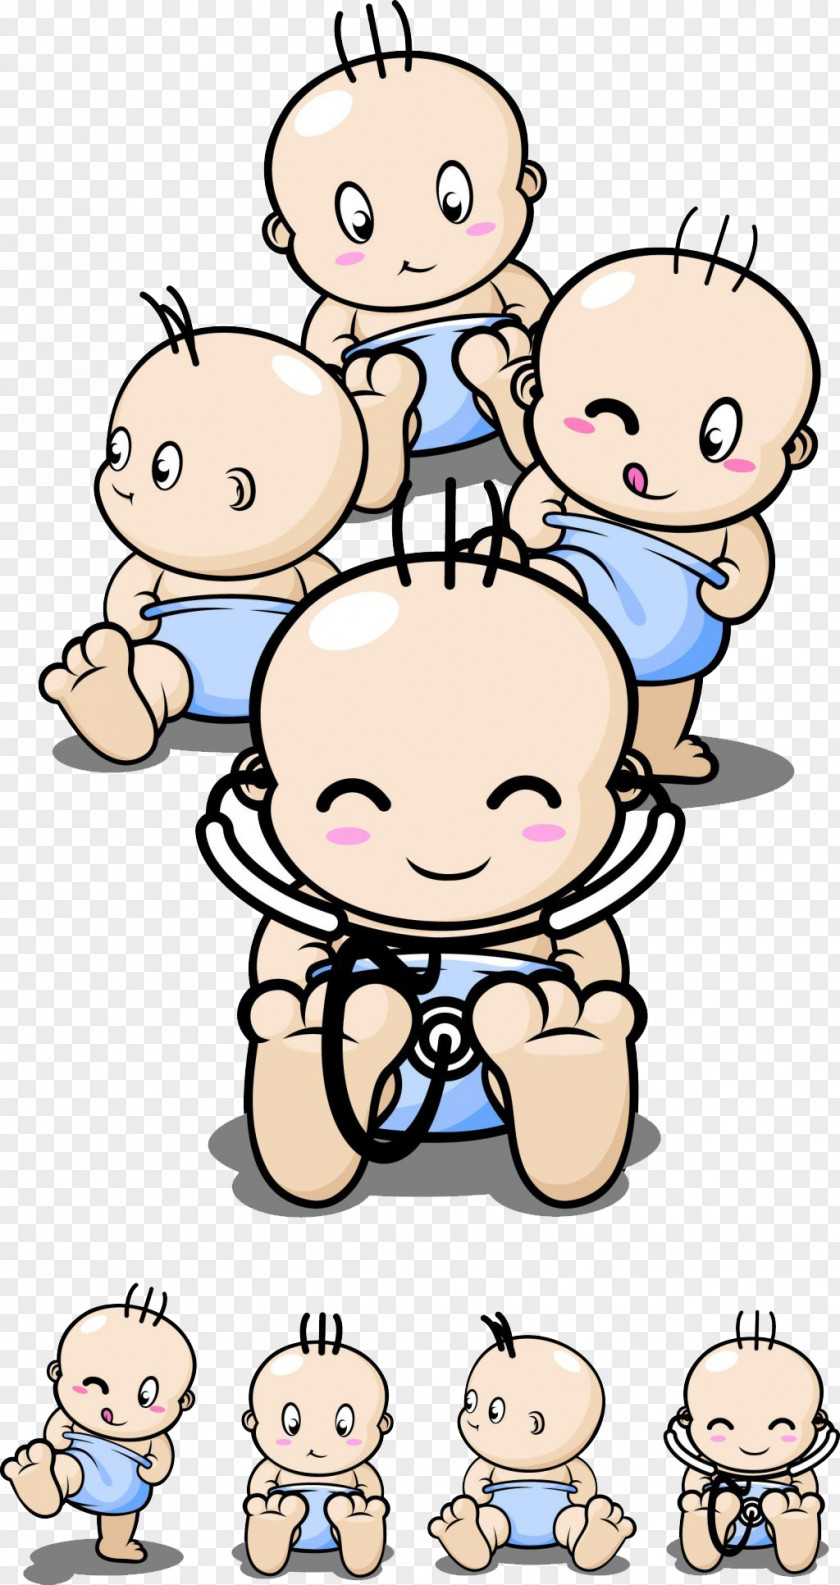 Cute Baby Infant Cartoon Drawing Clip Art PNG